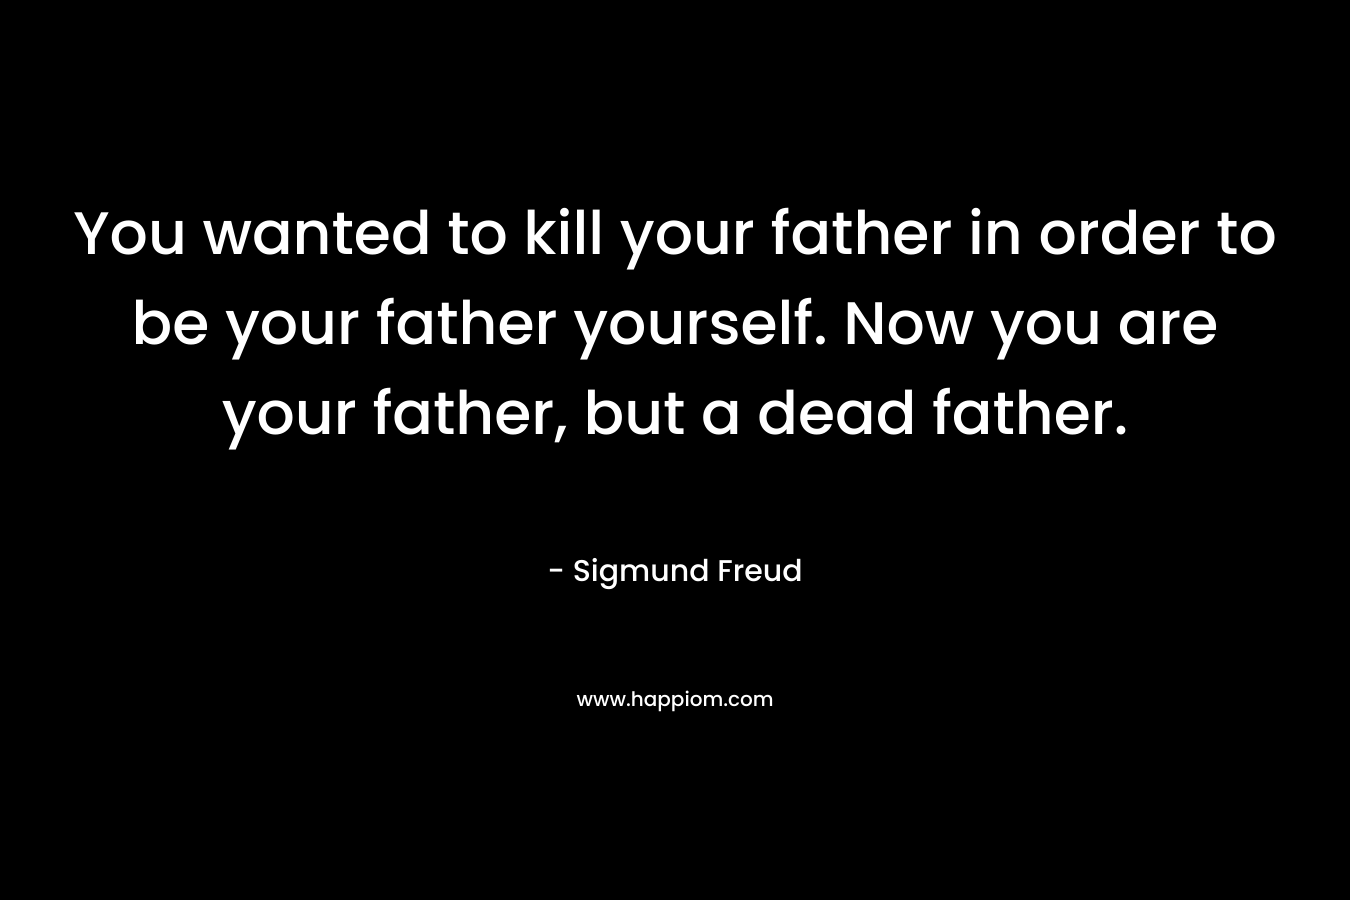 You wanted to kill your father in order to be your father yourself. Now you are your father, but a dead father. – Sigmund Freud